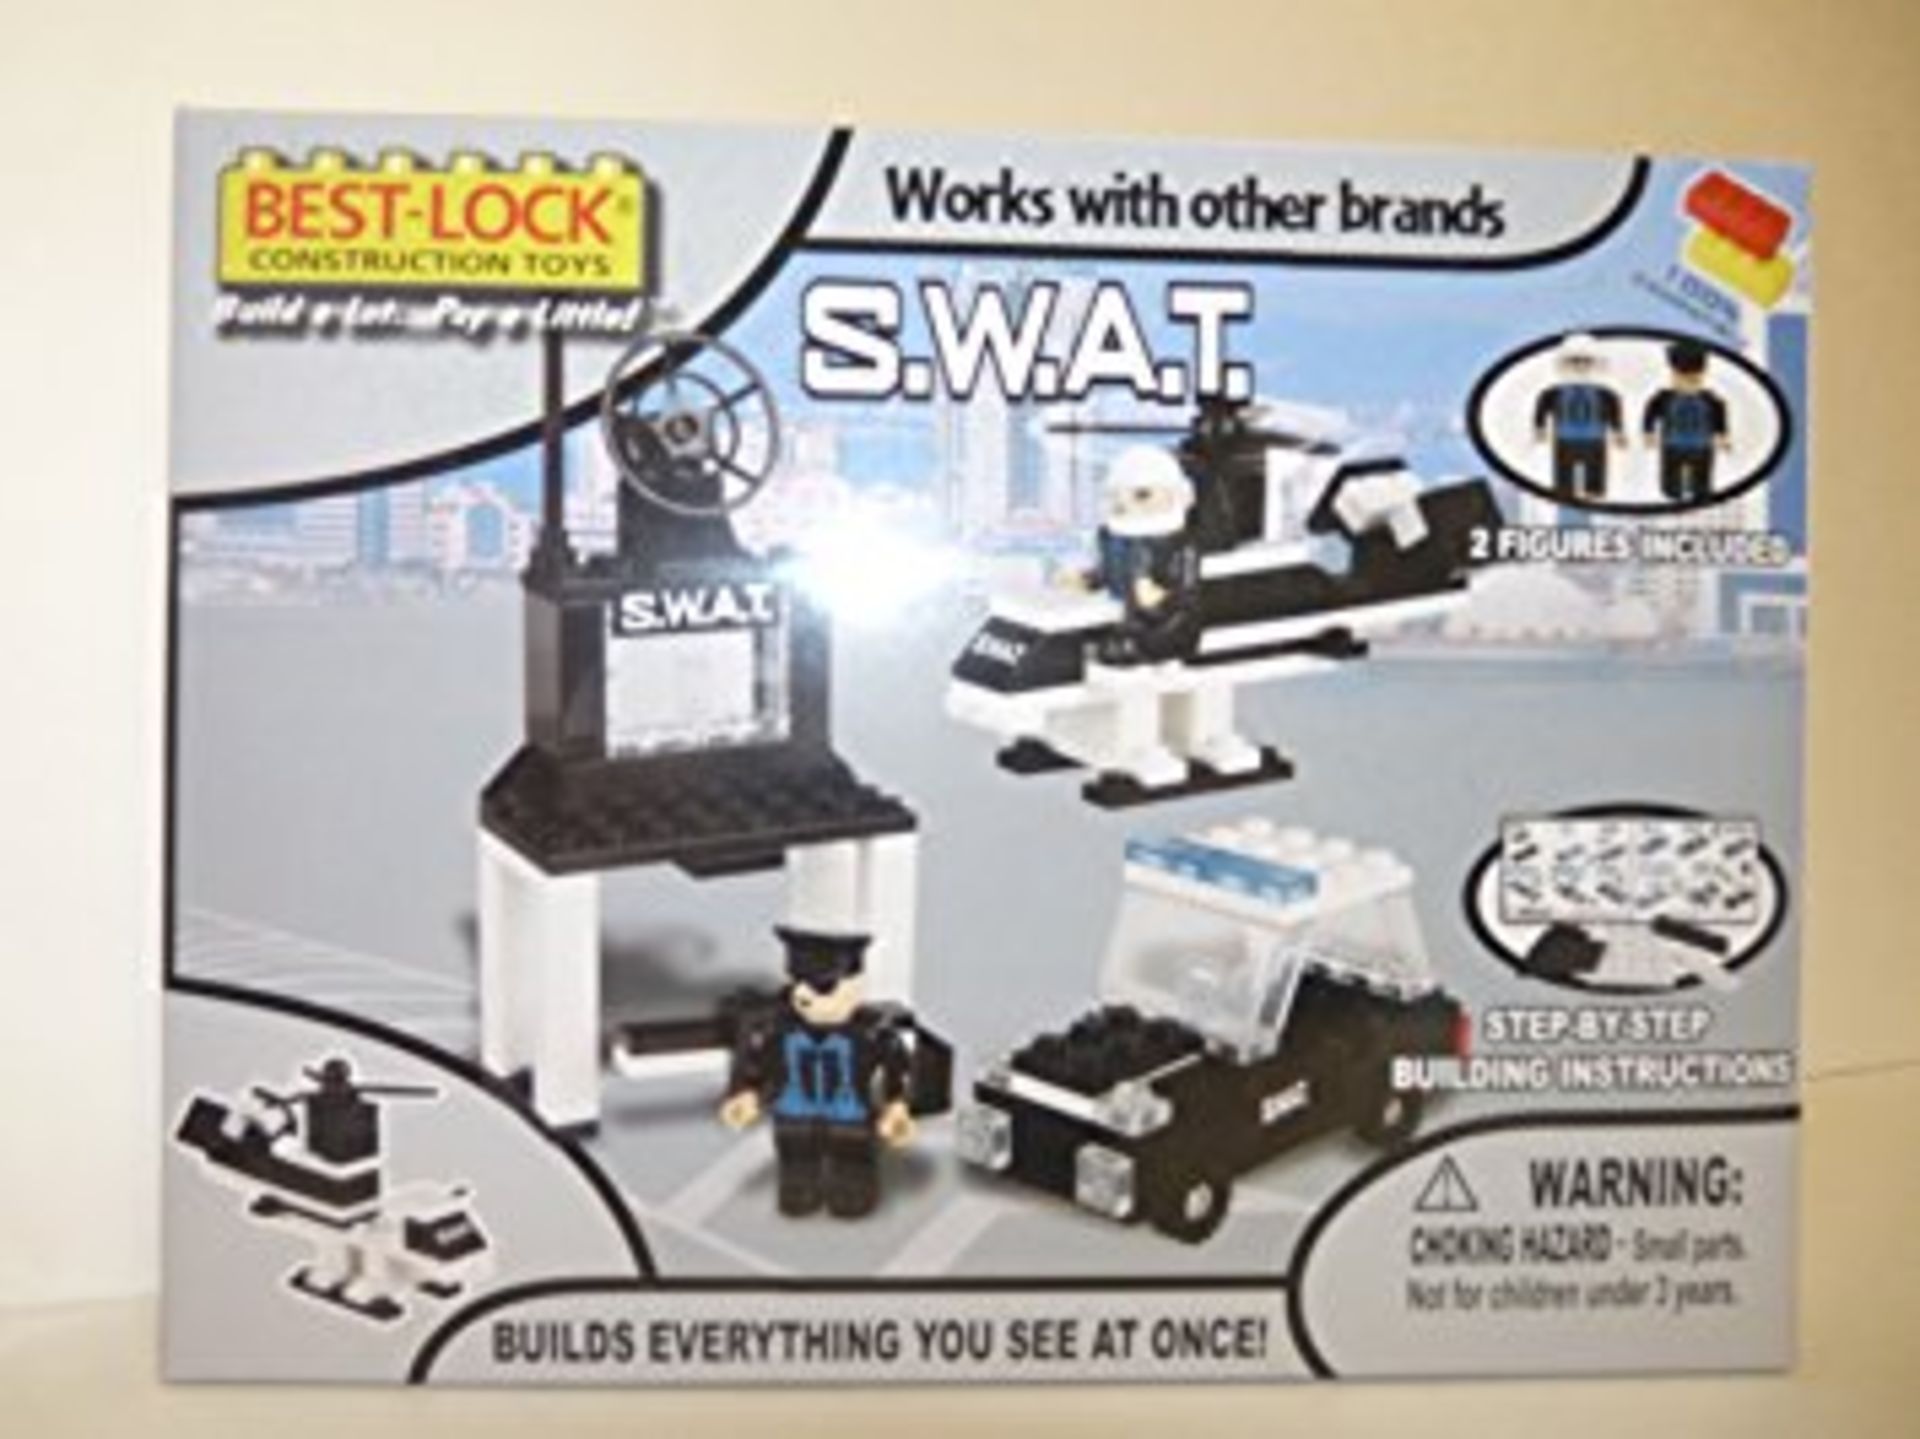 V Brand New Build Your Own S.W.A.T Team Includes SWAT HQ Helicopter 2 Vehicles Plus 3 Figures - 100%